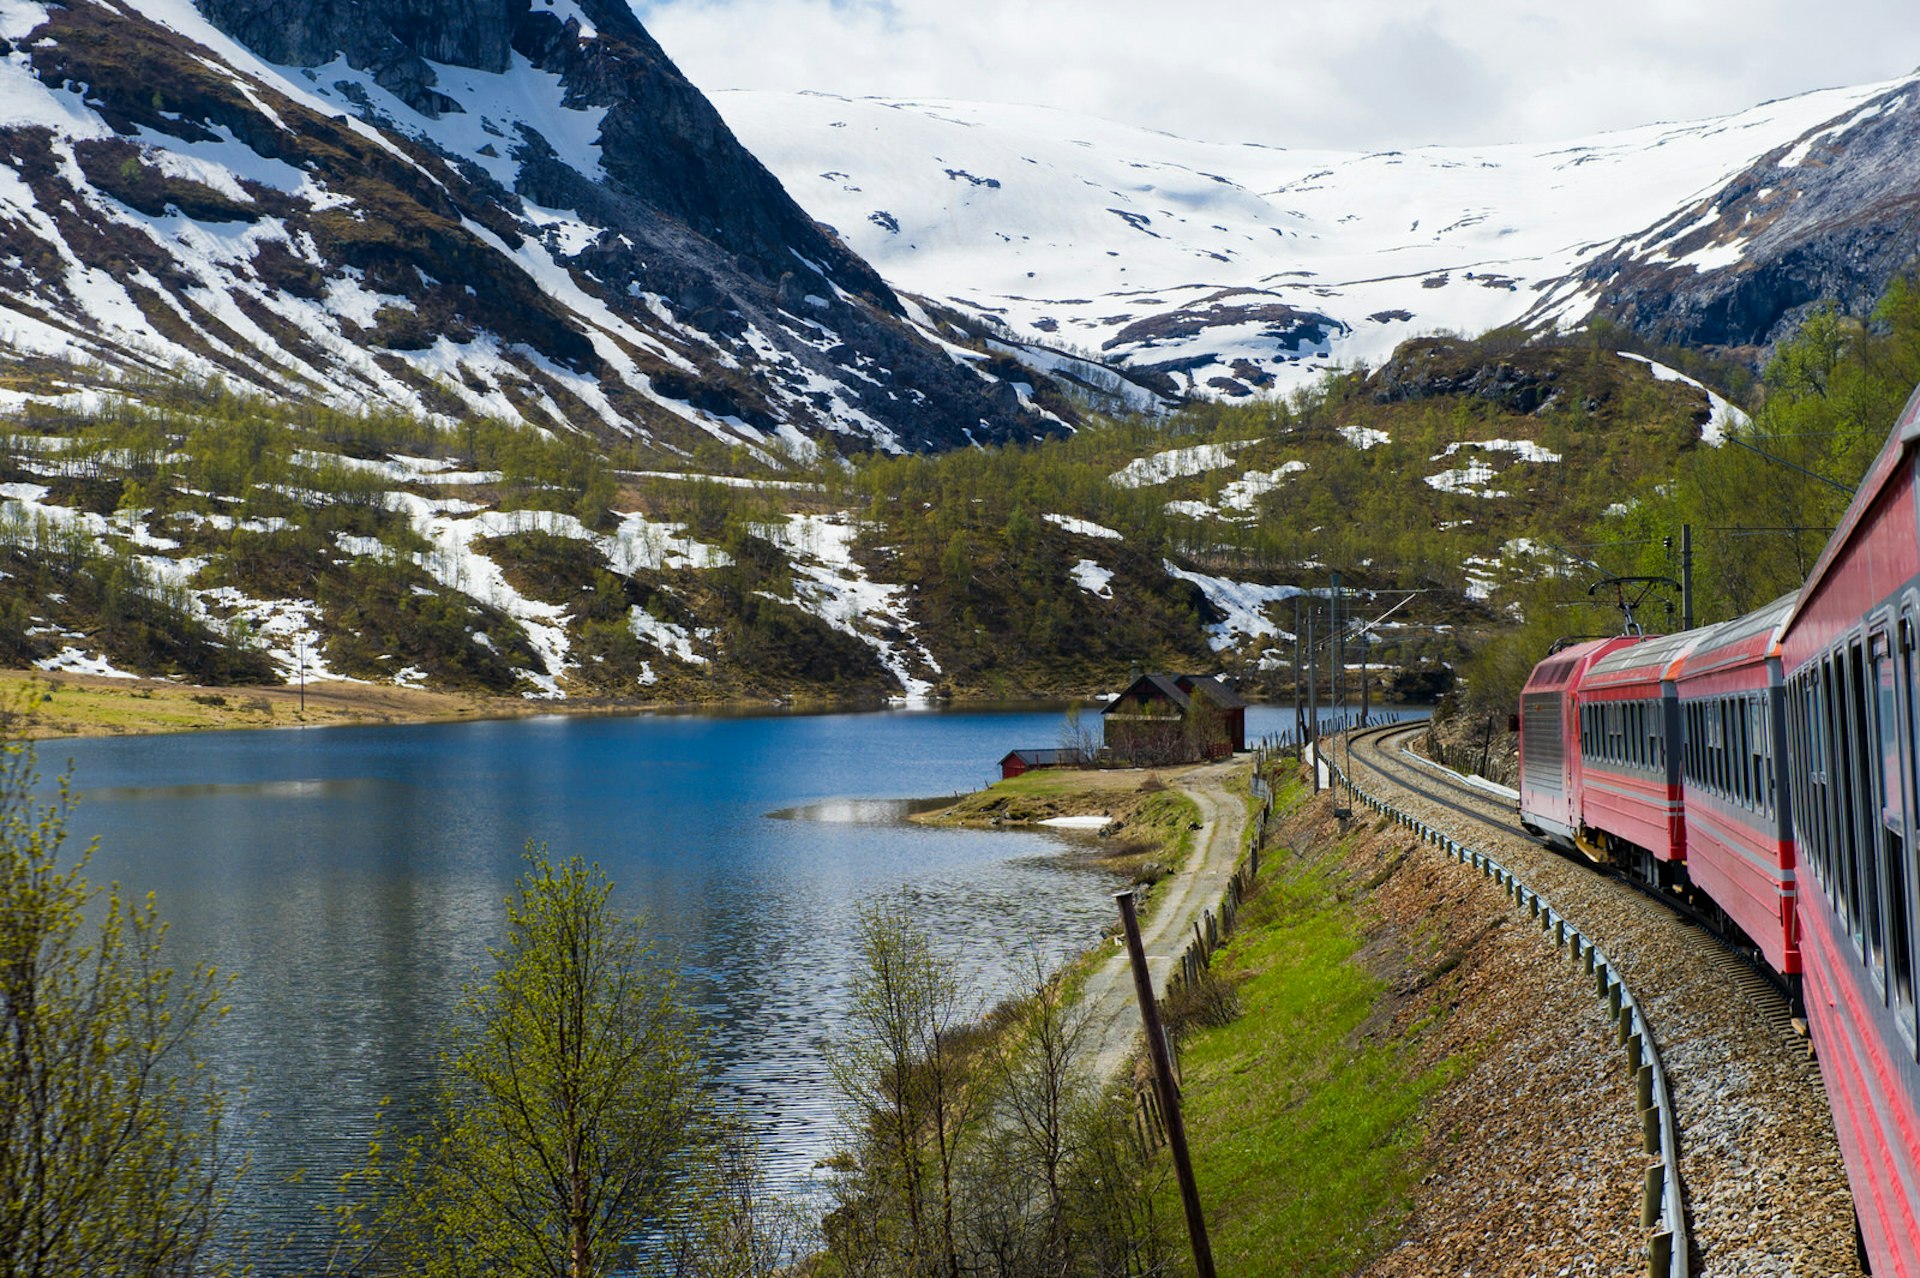 The red Bergensbanen passing a lake and snowy mountains en route from Oslo to Bergen